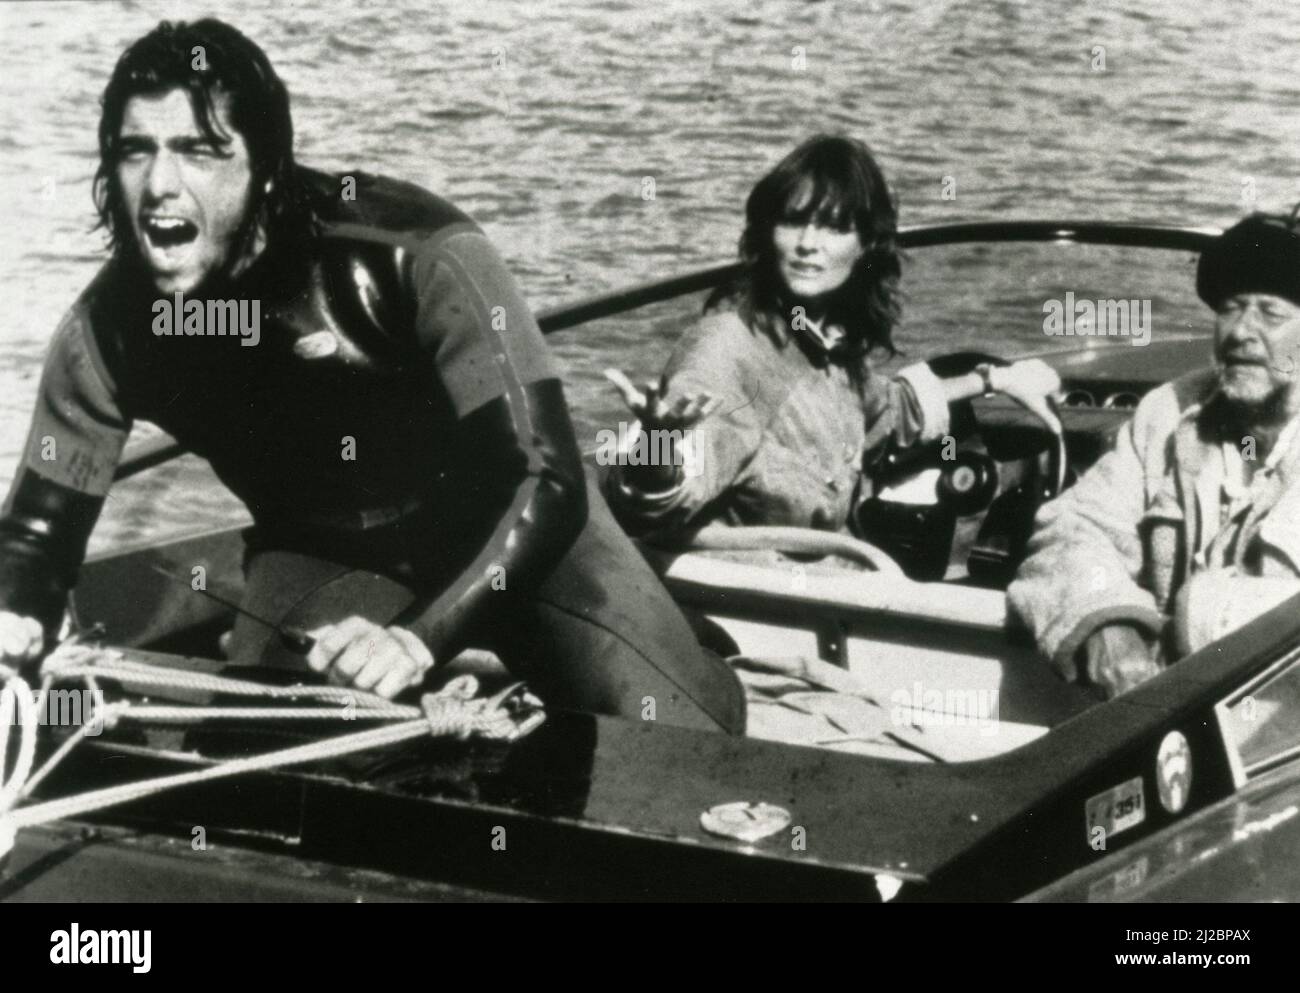 American actor Ken Wahl (left), actress Lesley Ann Warren, and actor Donald Pleasence in the movie Race For The Yankee Zephyr, Australia 1981 Stock Photo